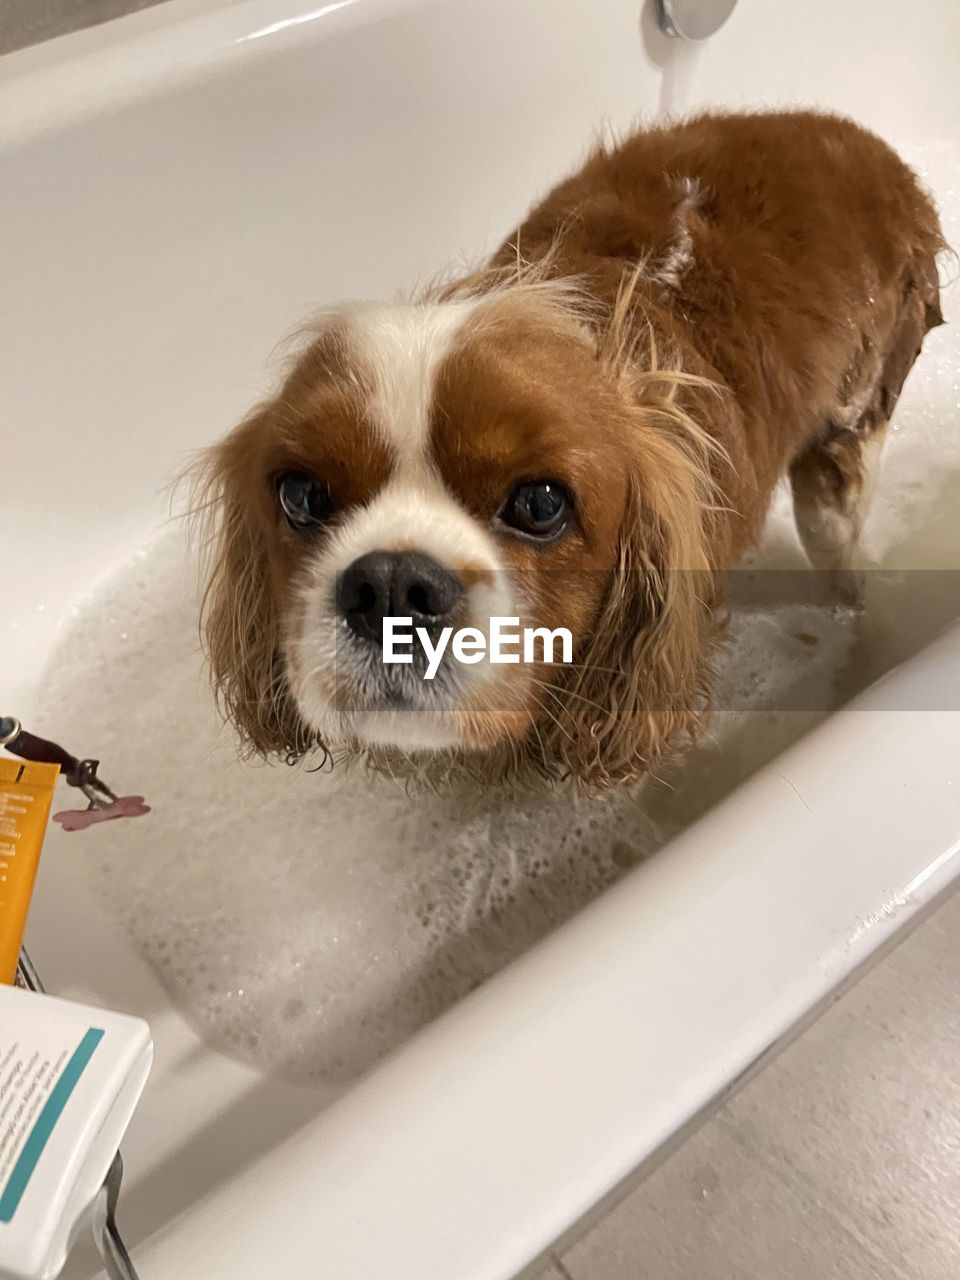 pet, mammal, dog, one animal, canine, domestic animals, animal themes, animal, domestic bathroom, bathtub, bathroom, home, lap dog, domestic room, hygiene, puppy, indoors, sink, washing, wet, portrait, taking a bath, soap sud, cleaning, carnivore, looking at camera, no people, water